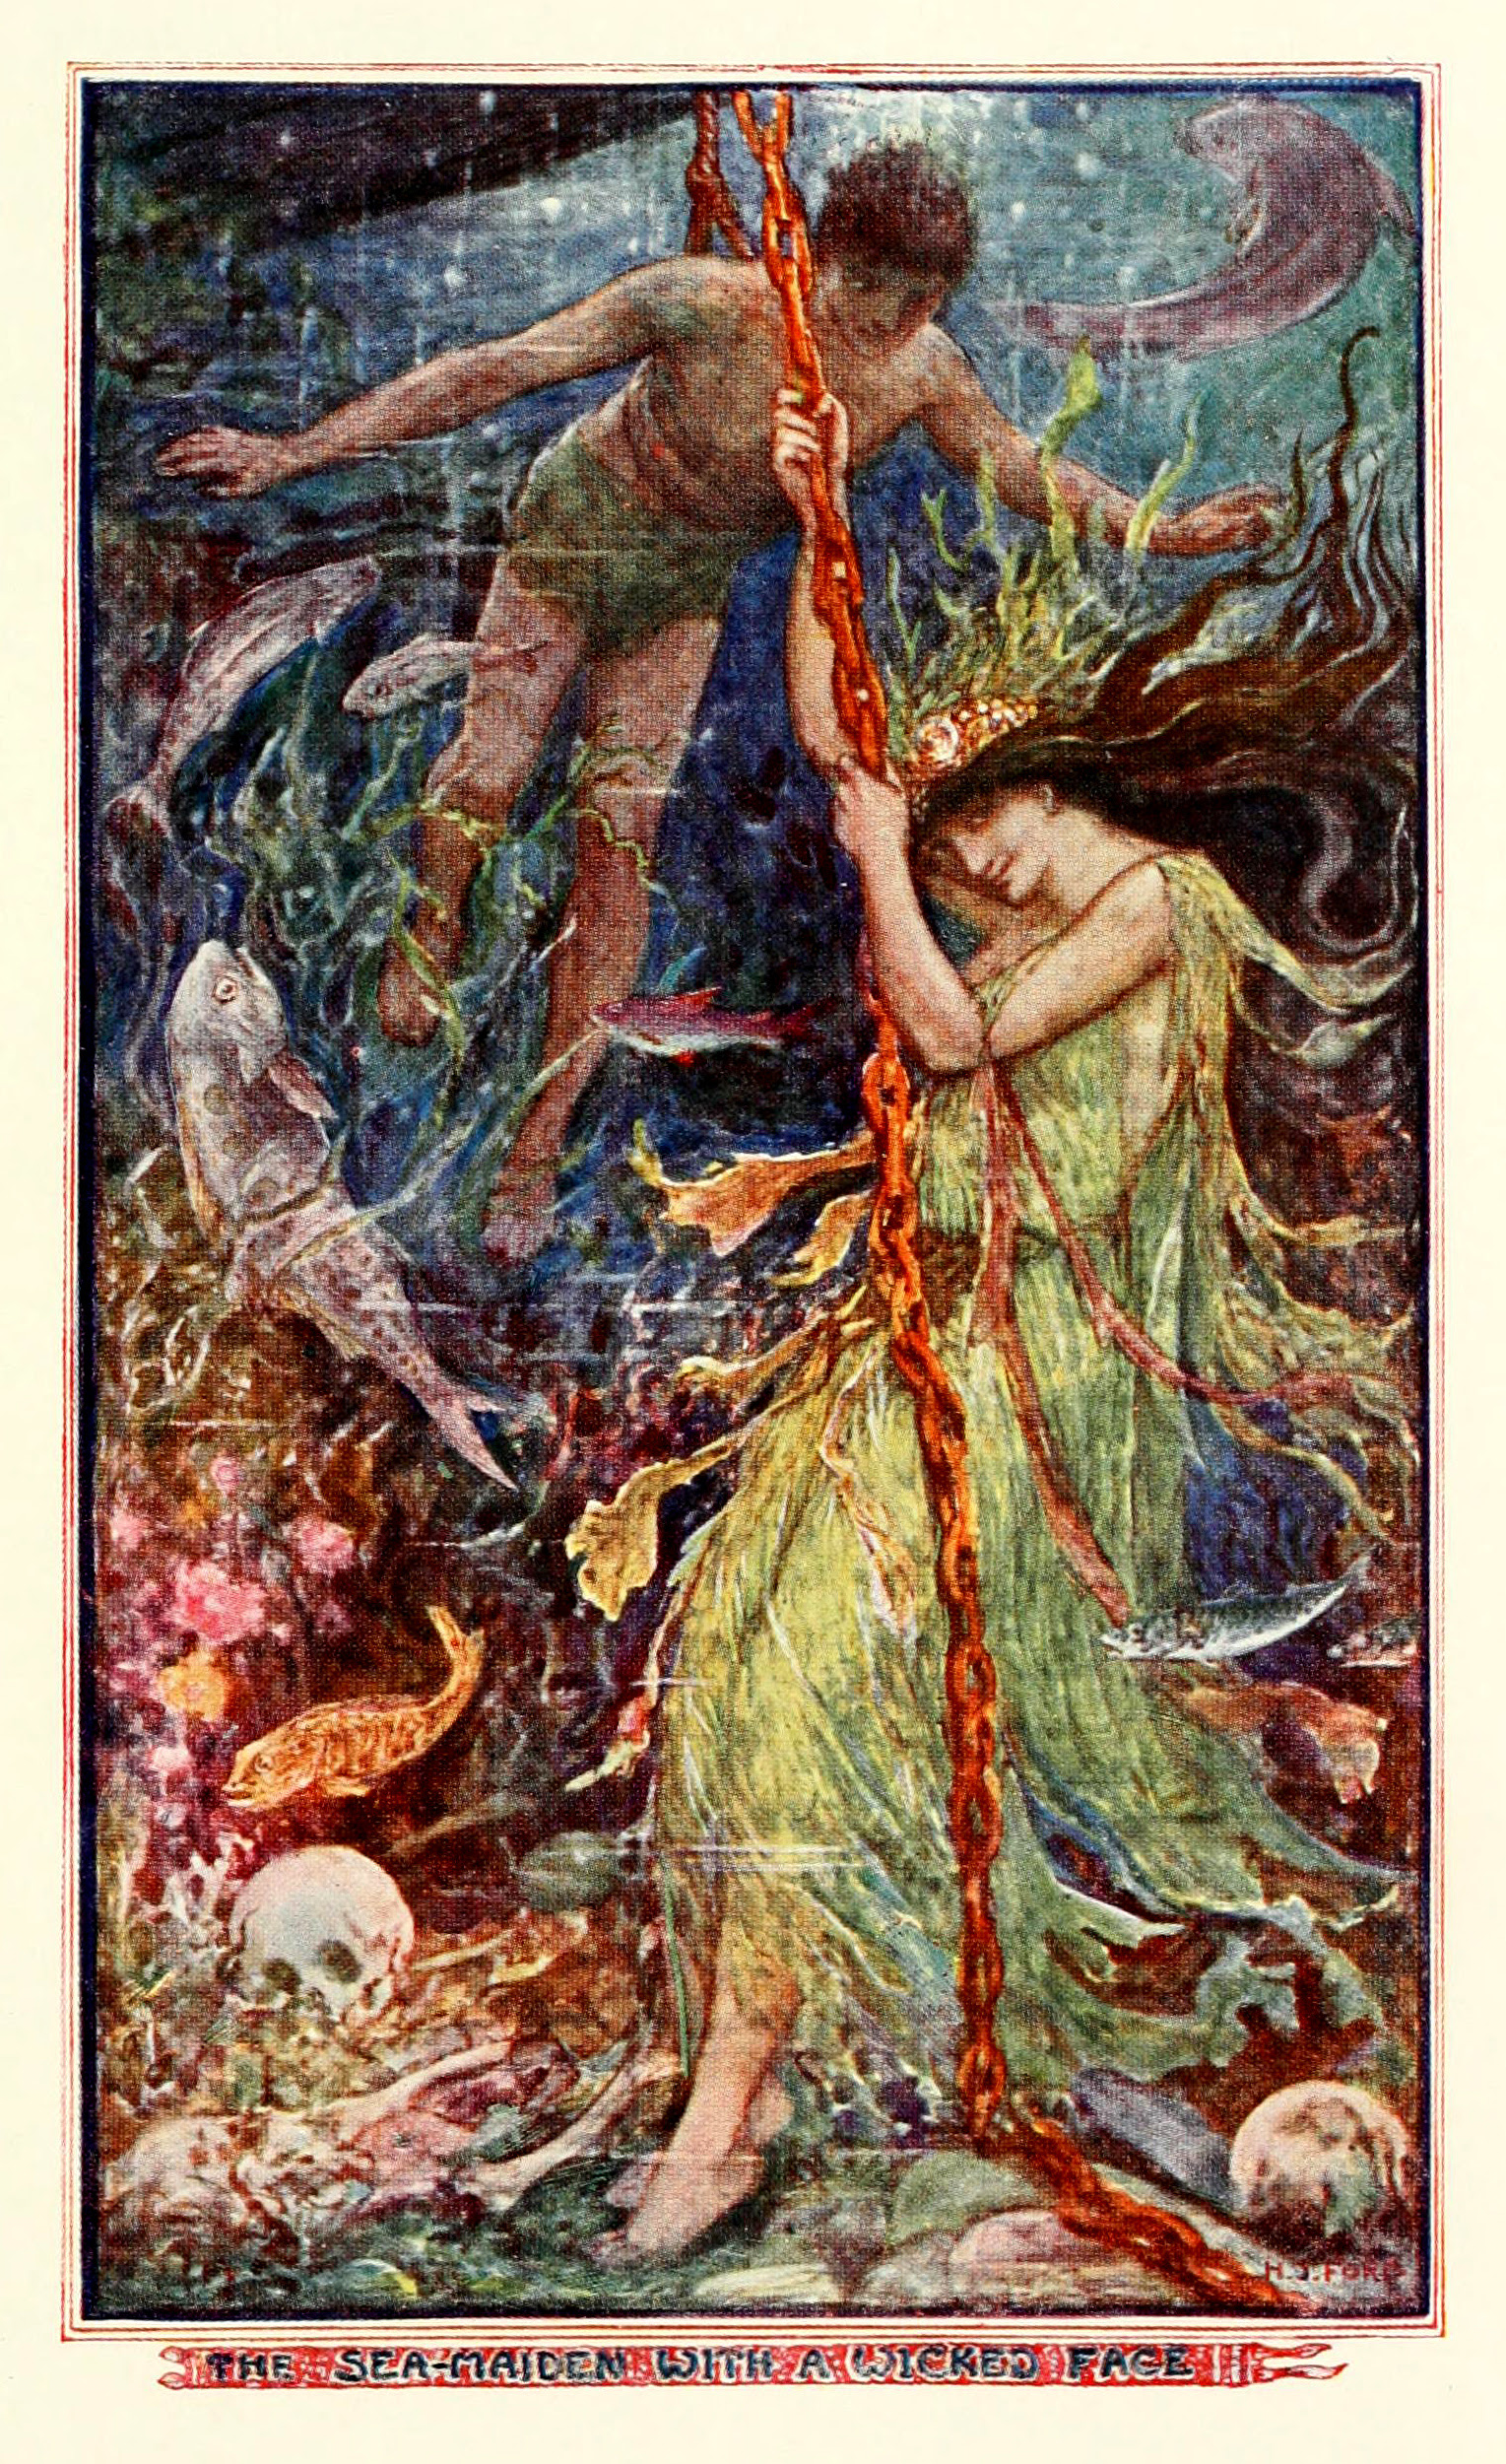 Henry Justice Ford - The olive fairy book, edited by Andrew Lang, 1968 (color plate 2)